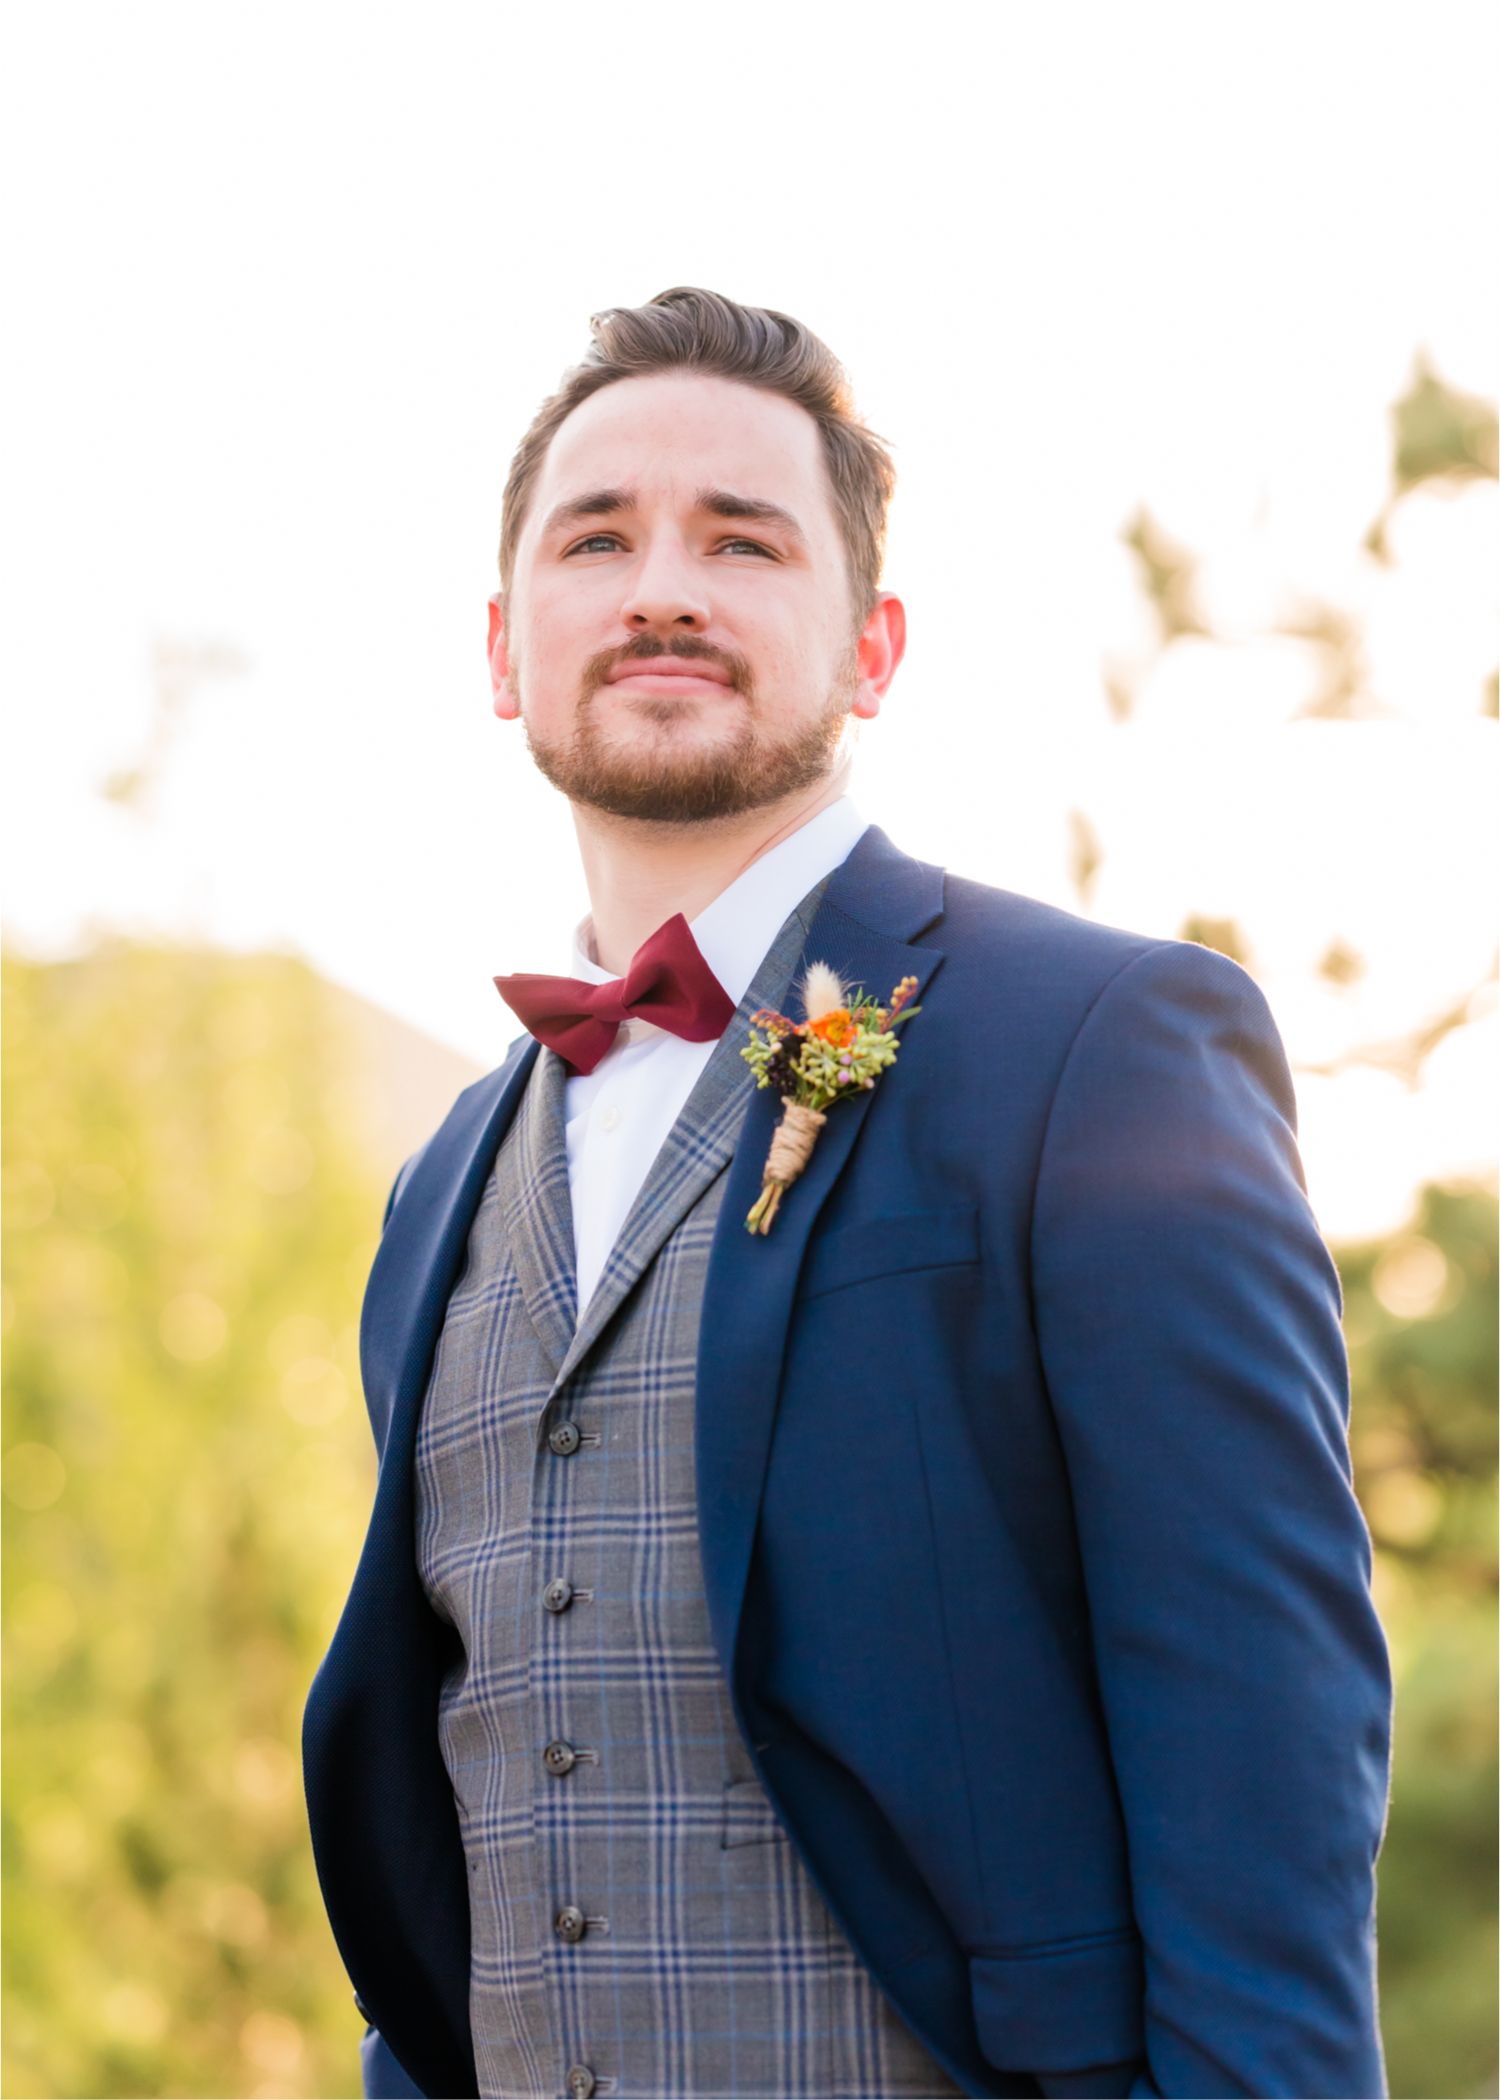 Romantic Whimsical Wedding at the Lionscrest Manor in Lyons, CO | Britni Girard Photography - Wedding Photo and Video Team | Rustic Fall Decor mixed in Burgundy, Blush, Gold and Sage | Groom in Custom Suit from Jos. a Banks